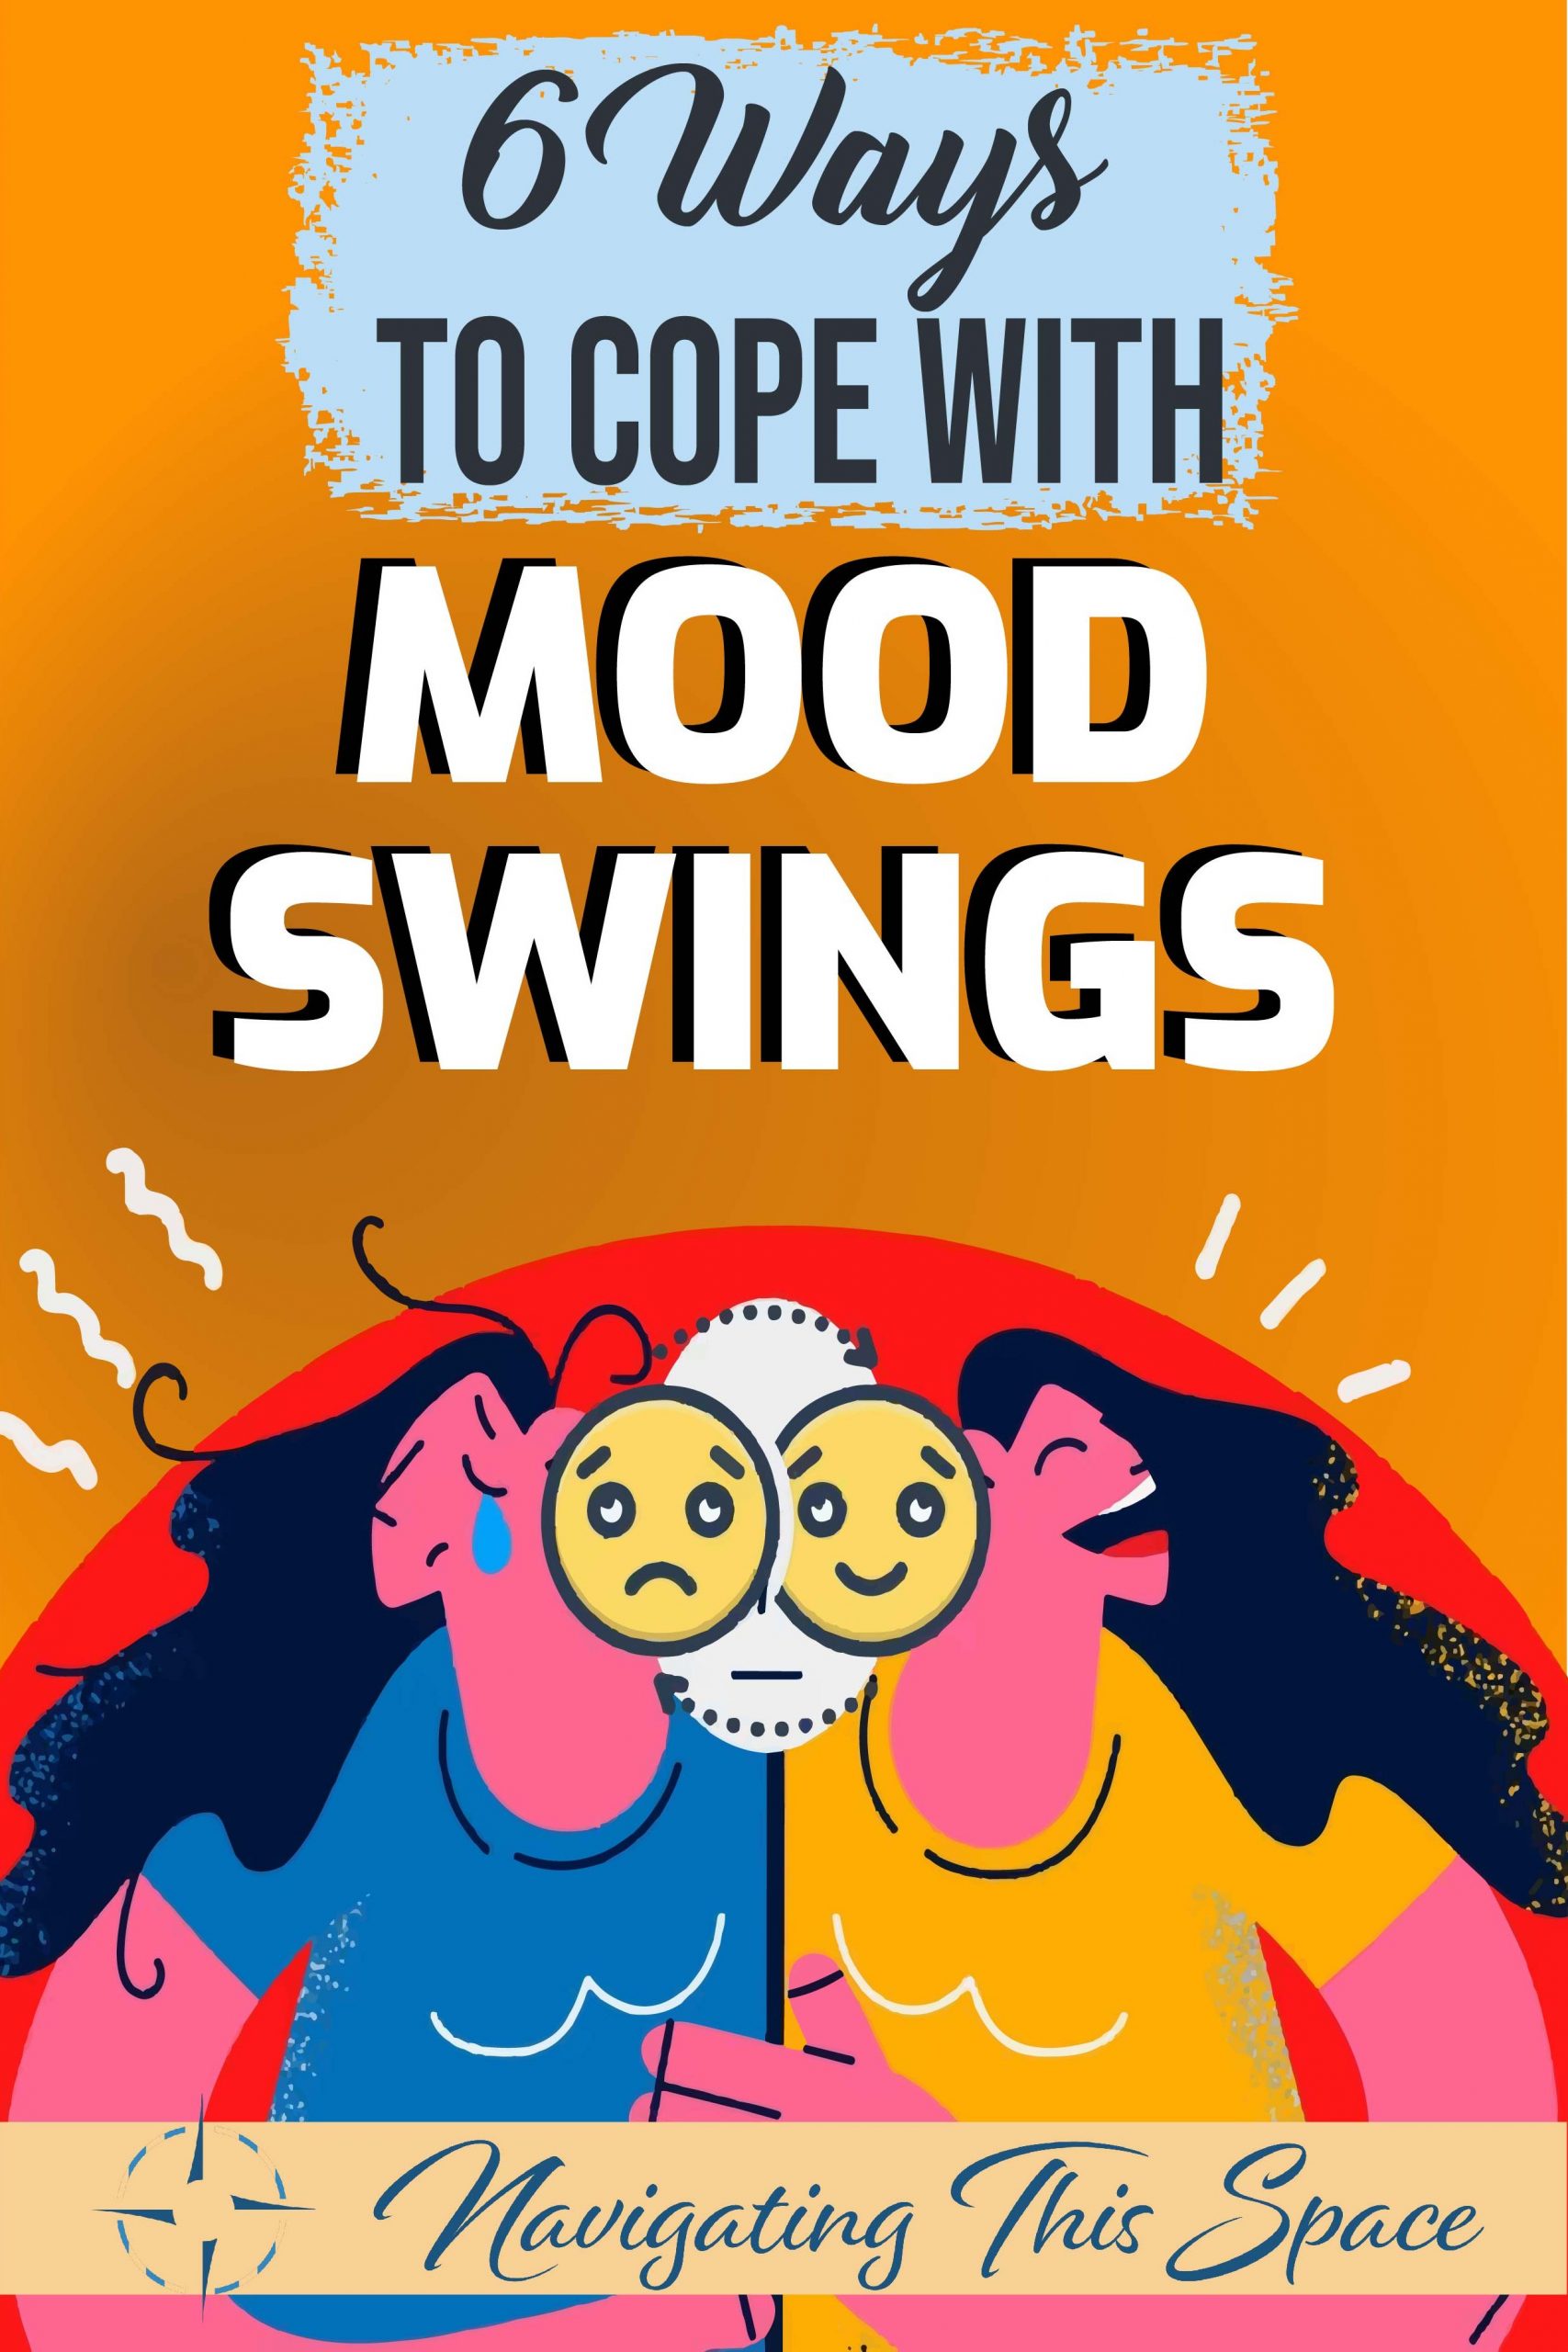 6 Ways to cope with mood swings